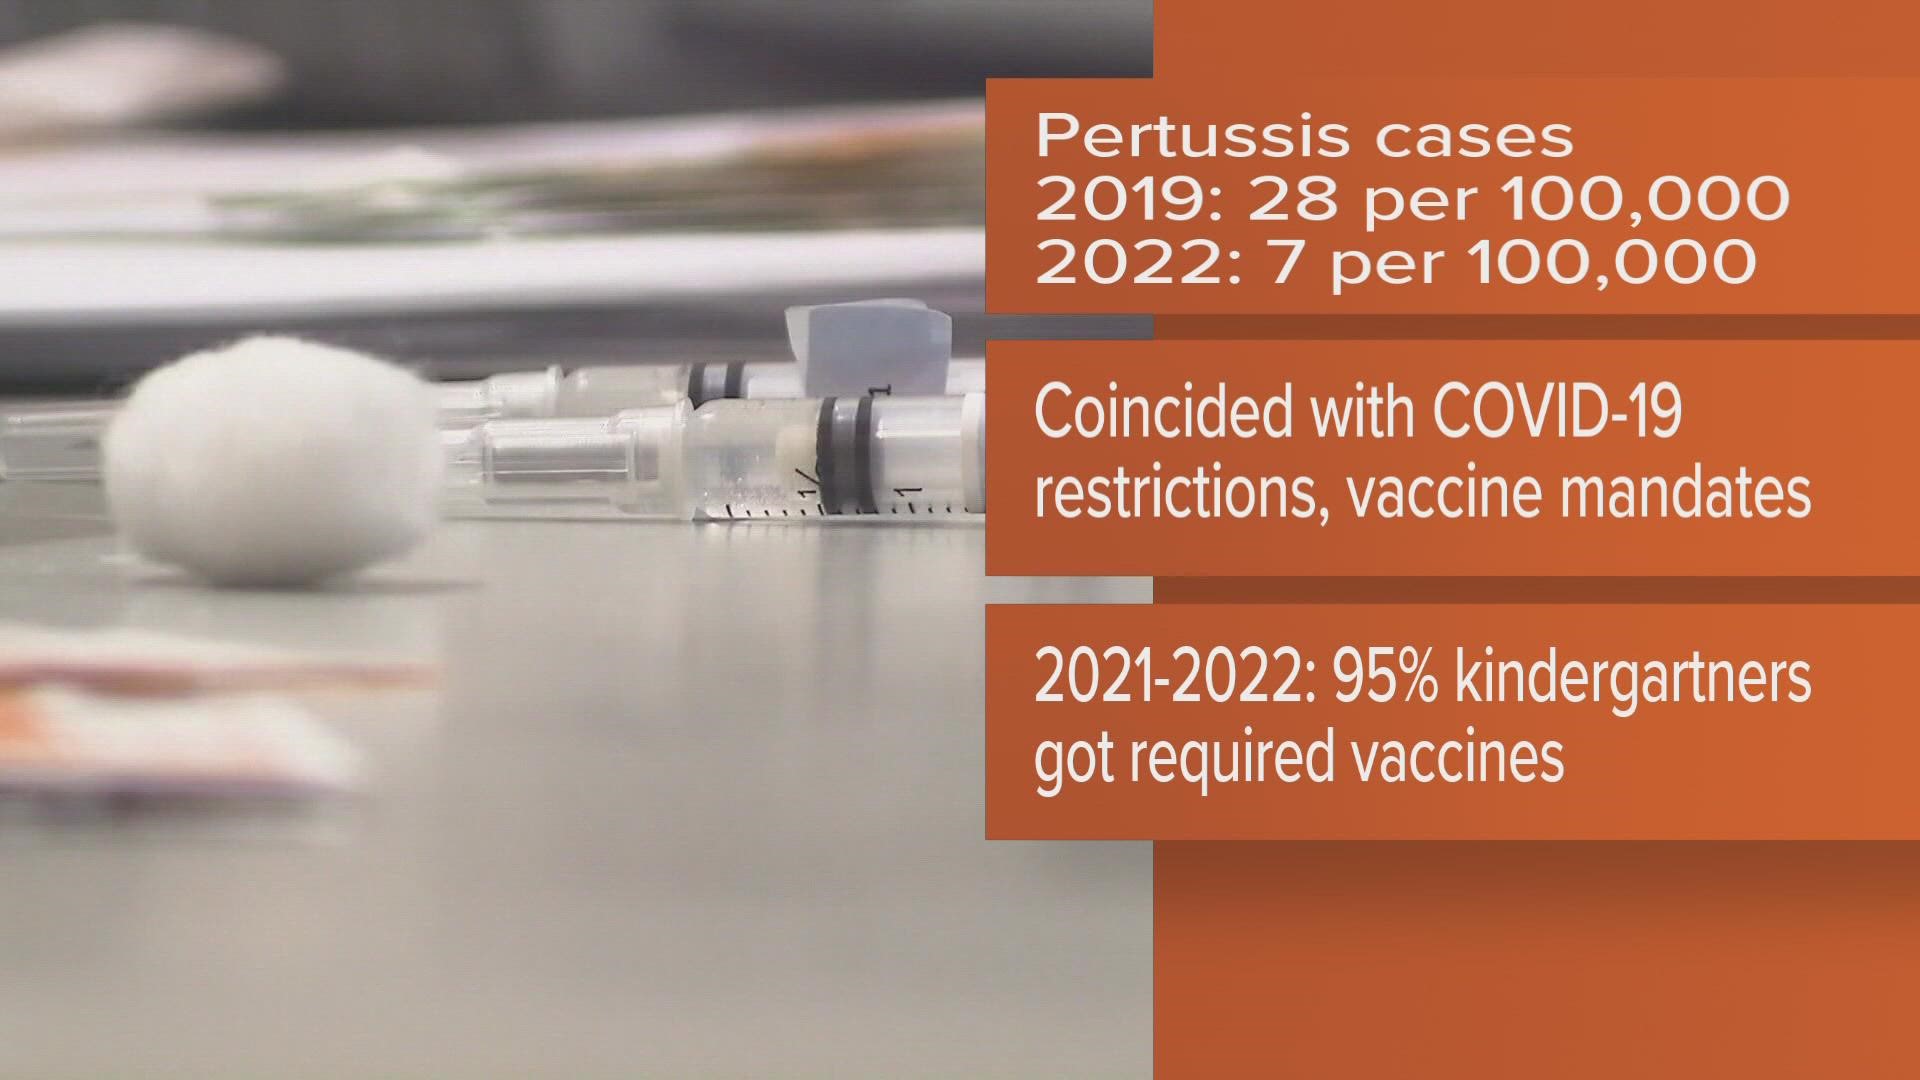 The Portland Press Herald reports Maine has seen a decrease in its total number of pertussis (or whopping cough) cases in 2022, compared to 2019.